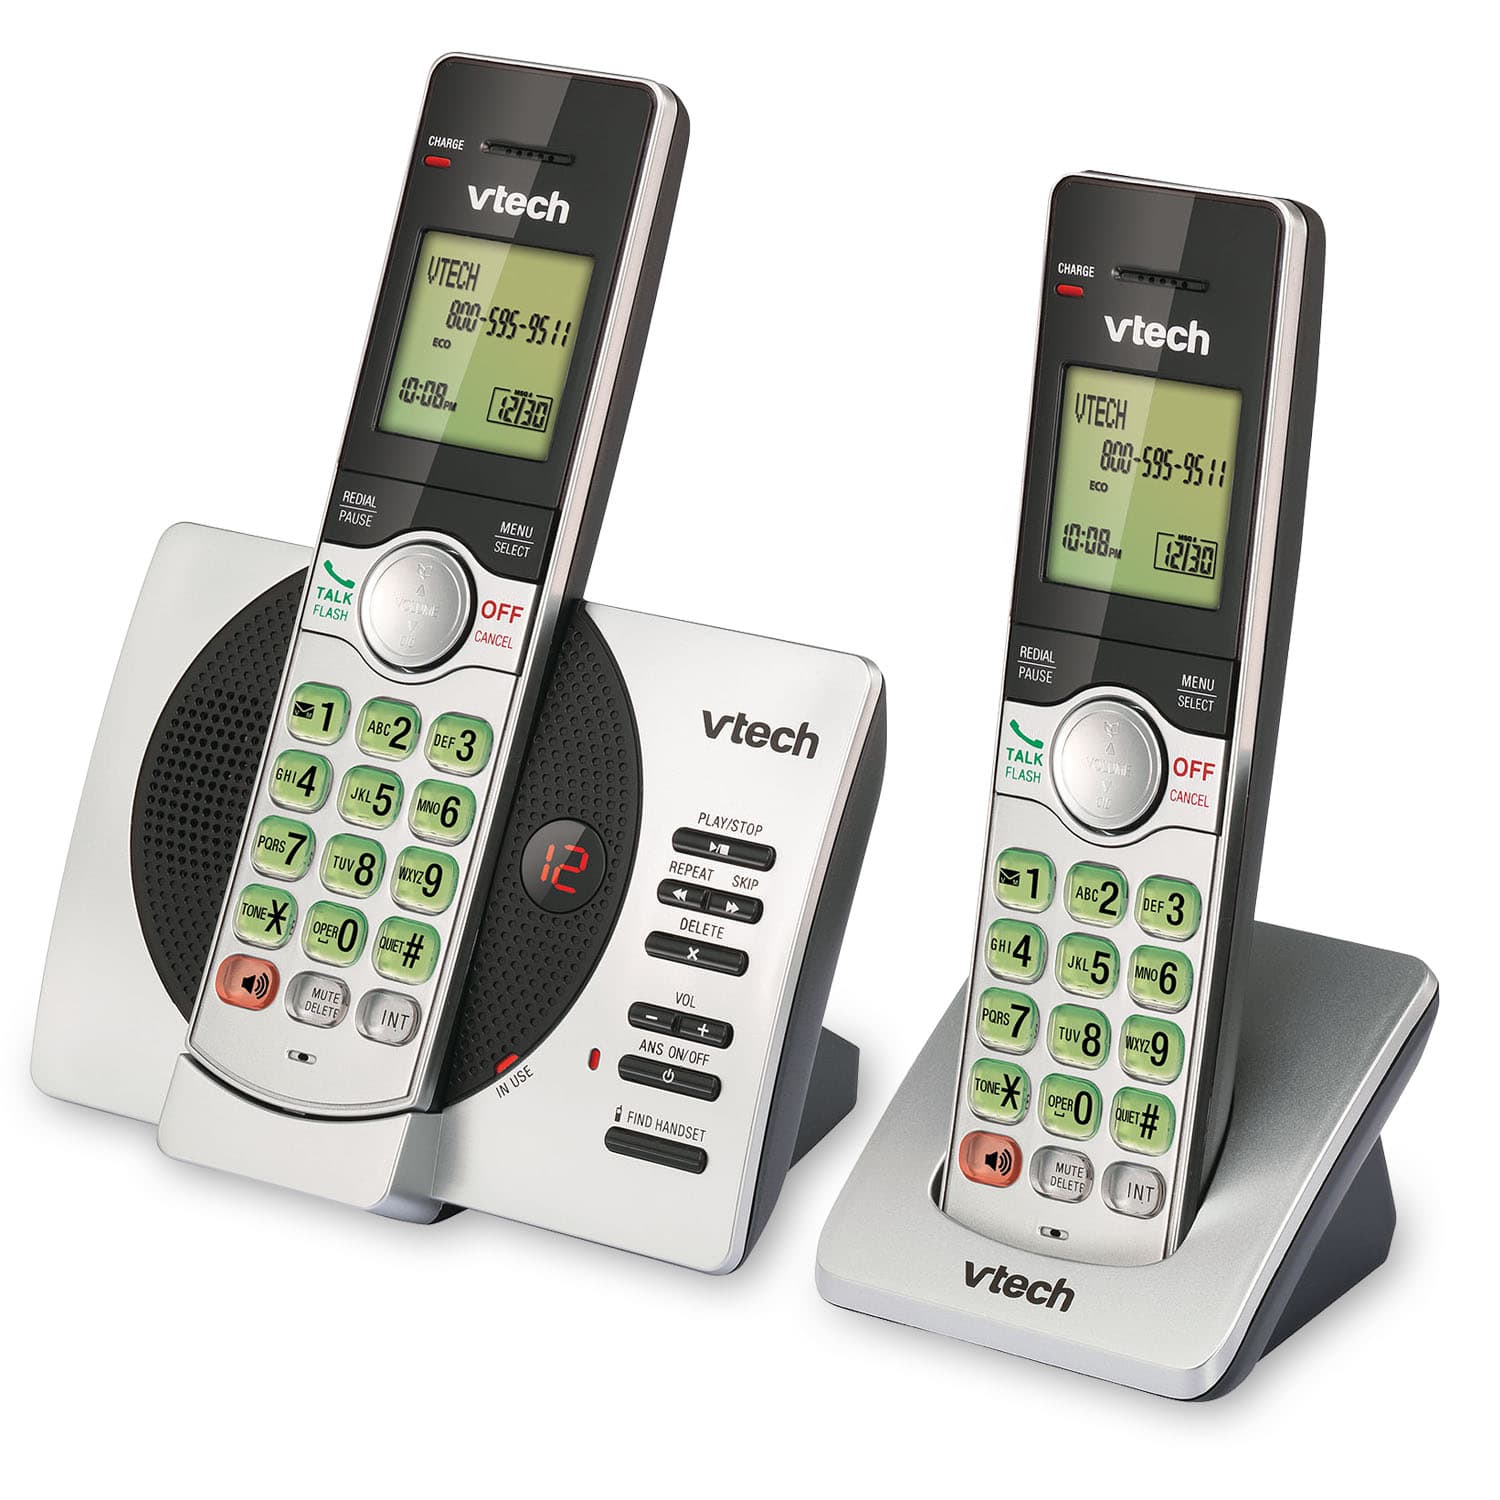 2 Handset Cordless Answering System with Caller ID/Call Waiting - view 2